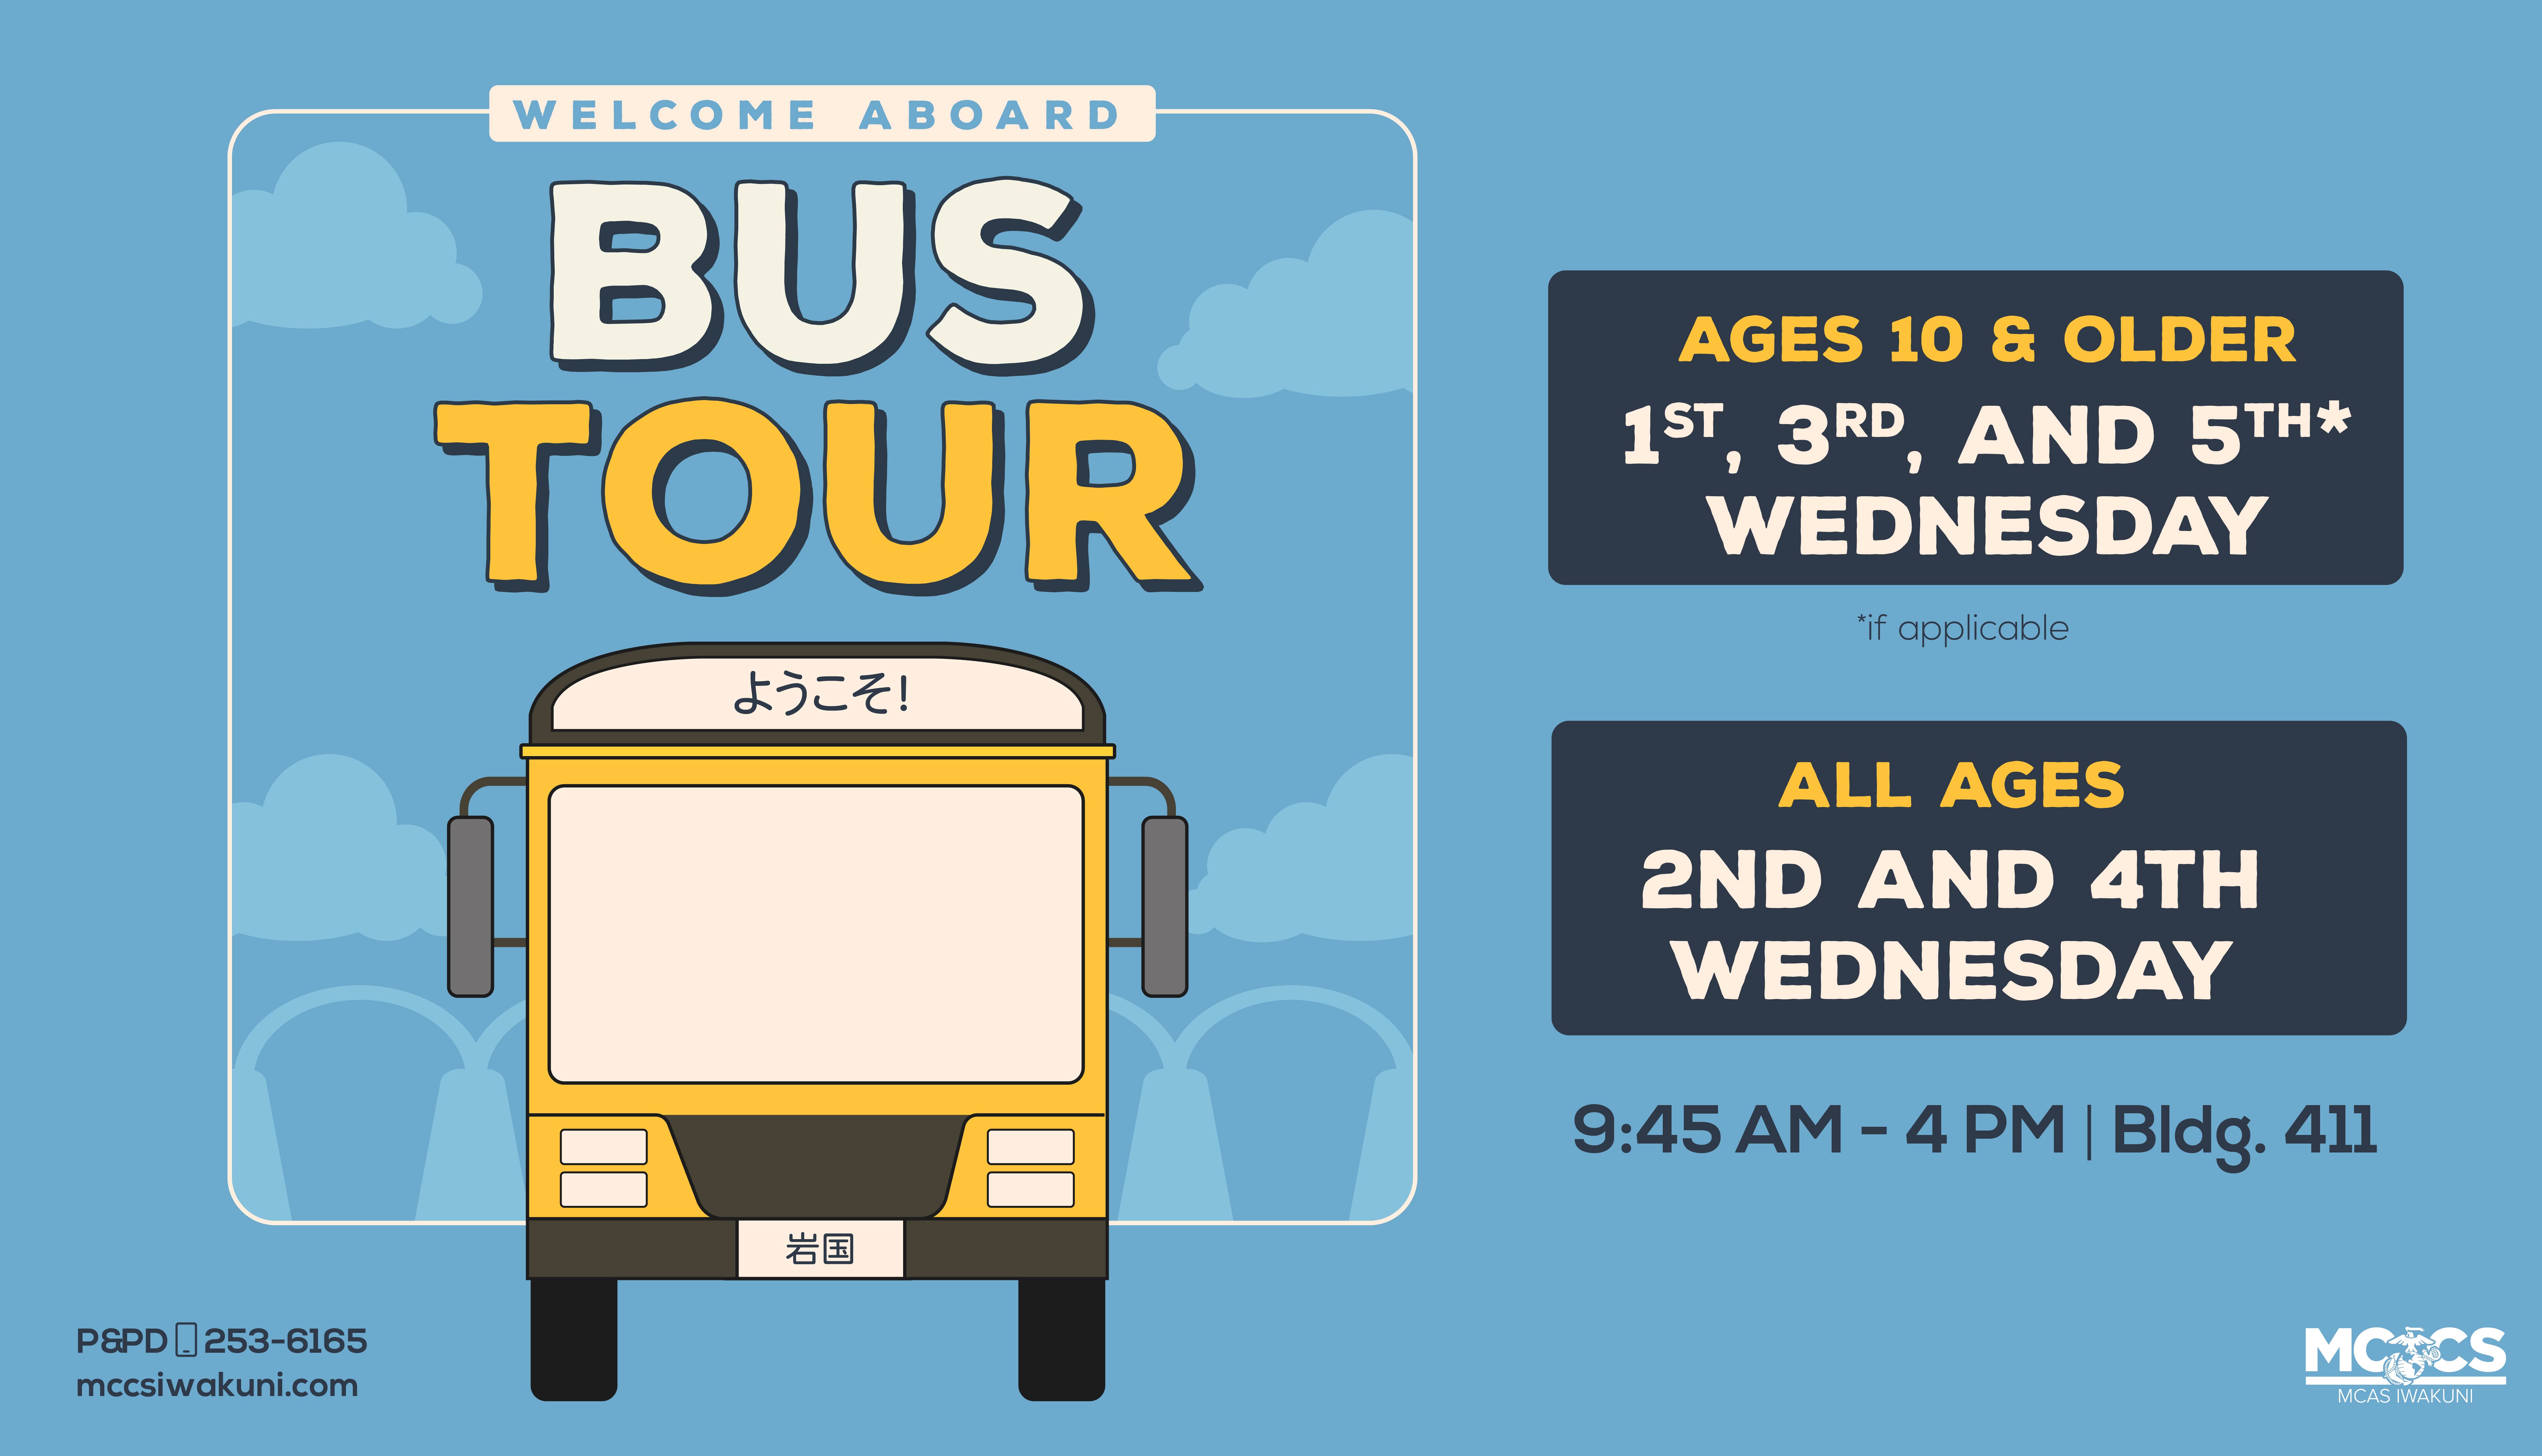 Welcome Aboard Bus Tour - Ages 10 and Older